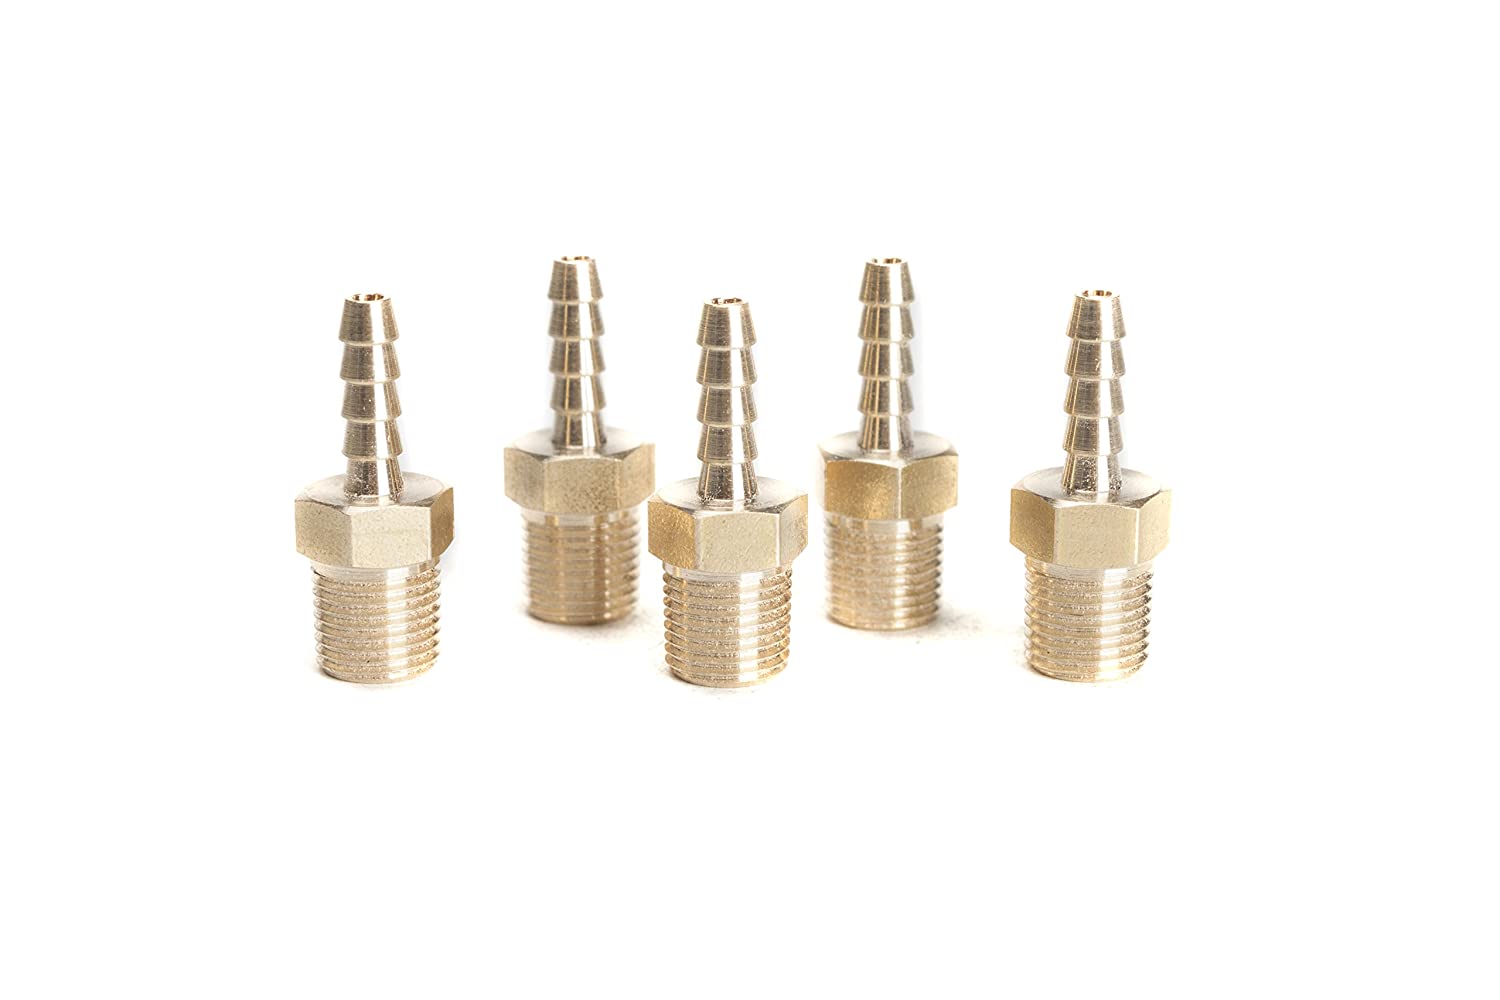 LTWFITTING Brass Barbed Fitting Coupler/Connector 1/8-Inch Hose Barb x 1/8-Inch Male NPT (Pack of 5)